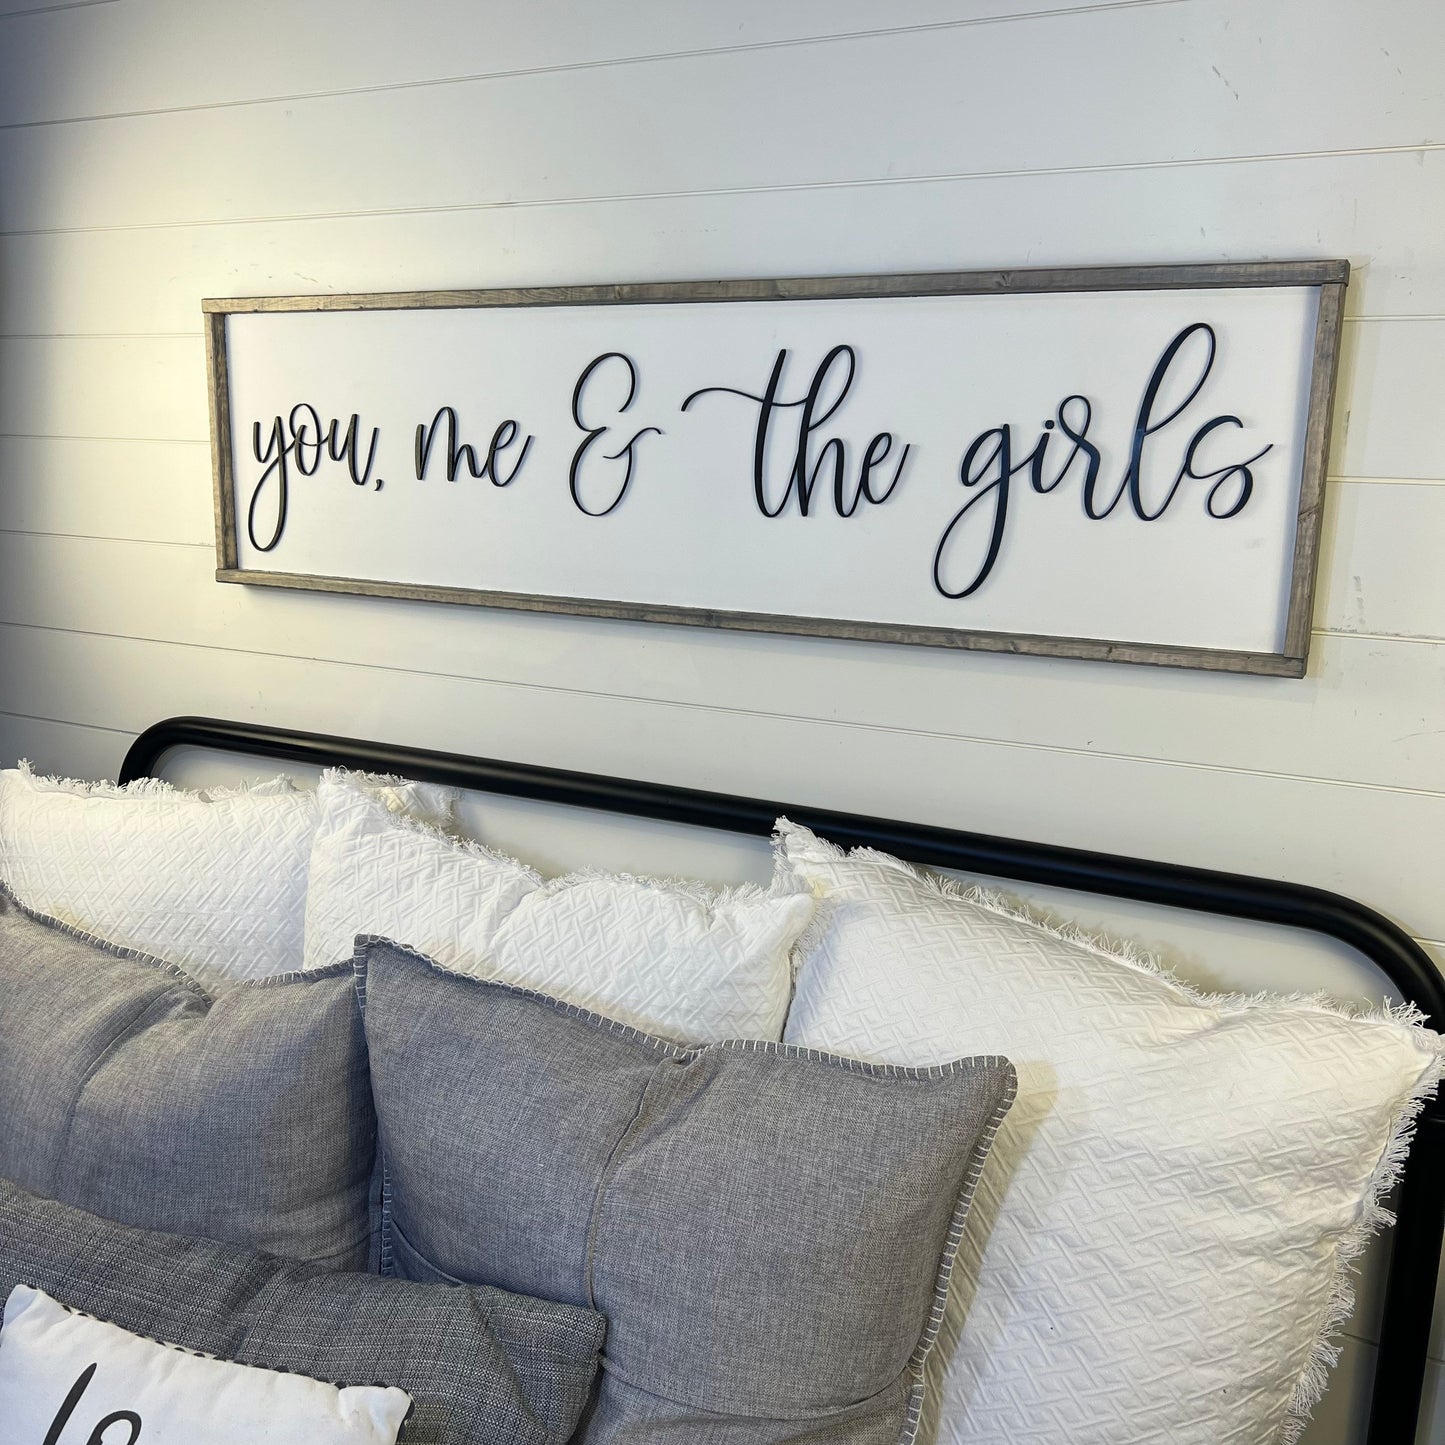 you, me & the girls - above over the bed sign - master bedroom wall art [FREE SHIPPING!]